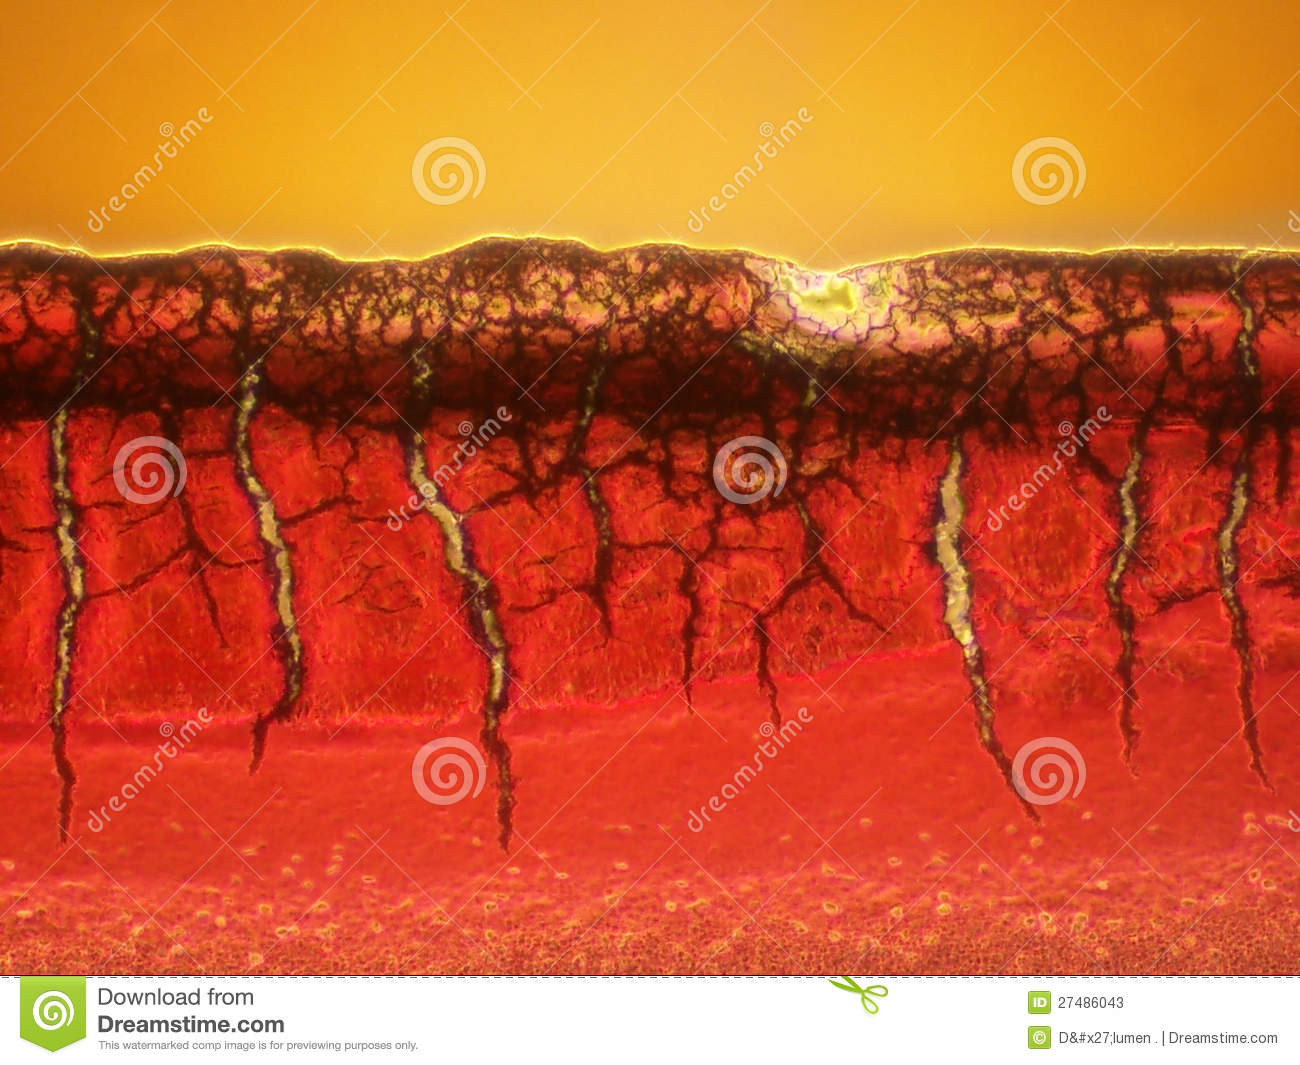 Microscopic Picture Of A Blood Clot Stock Photos   Image  27486043